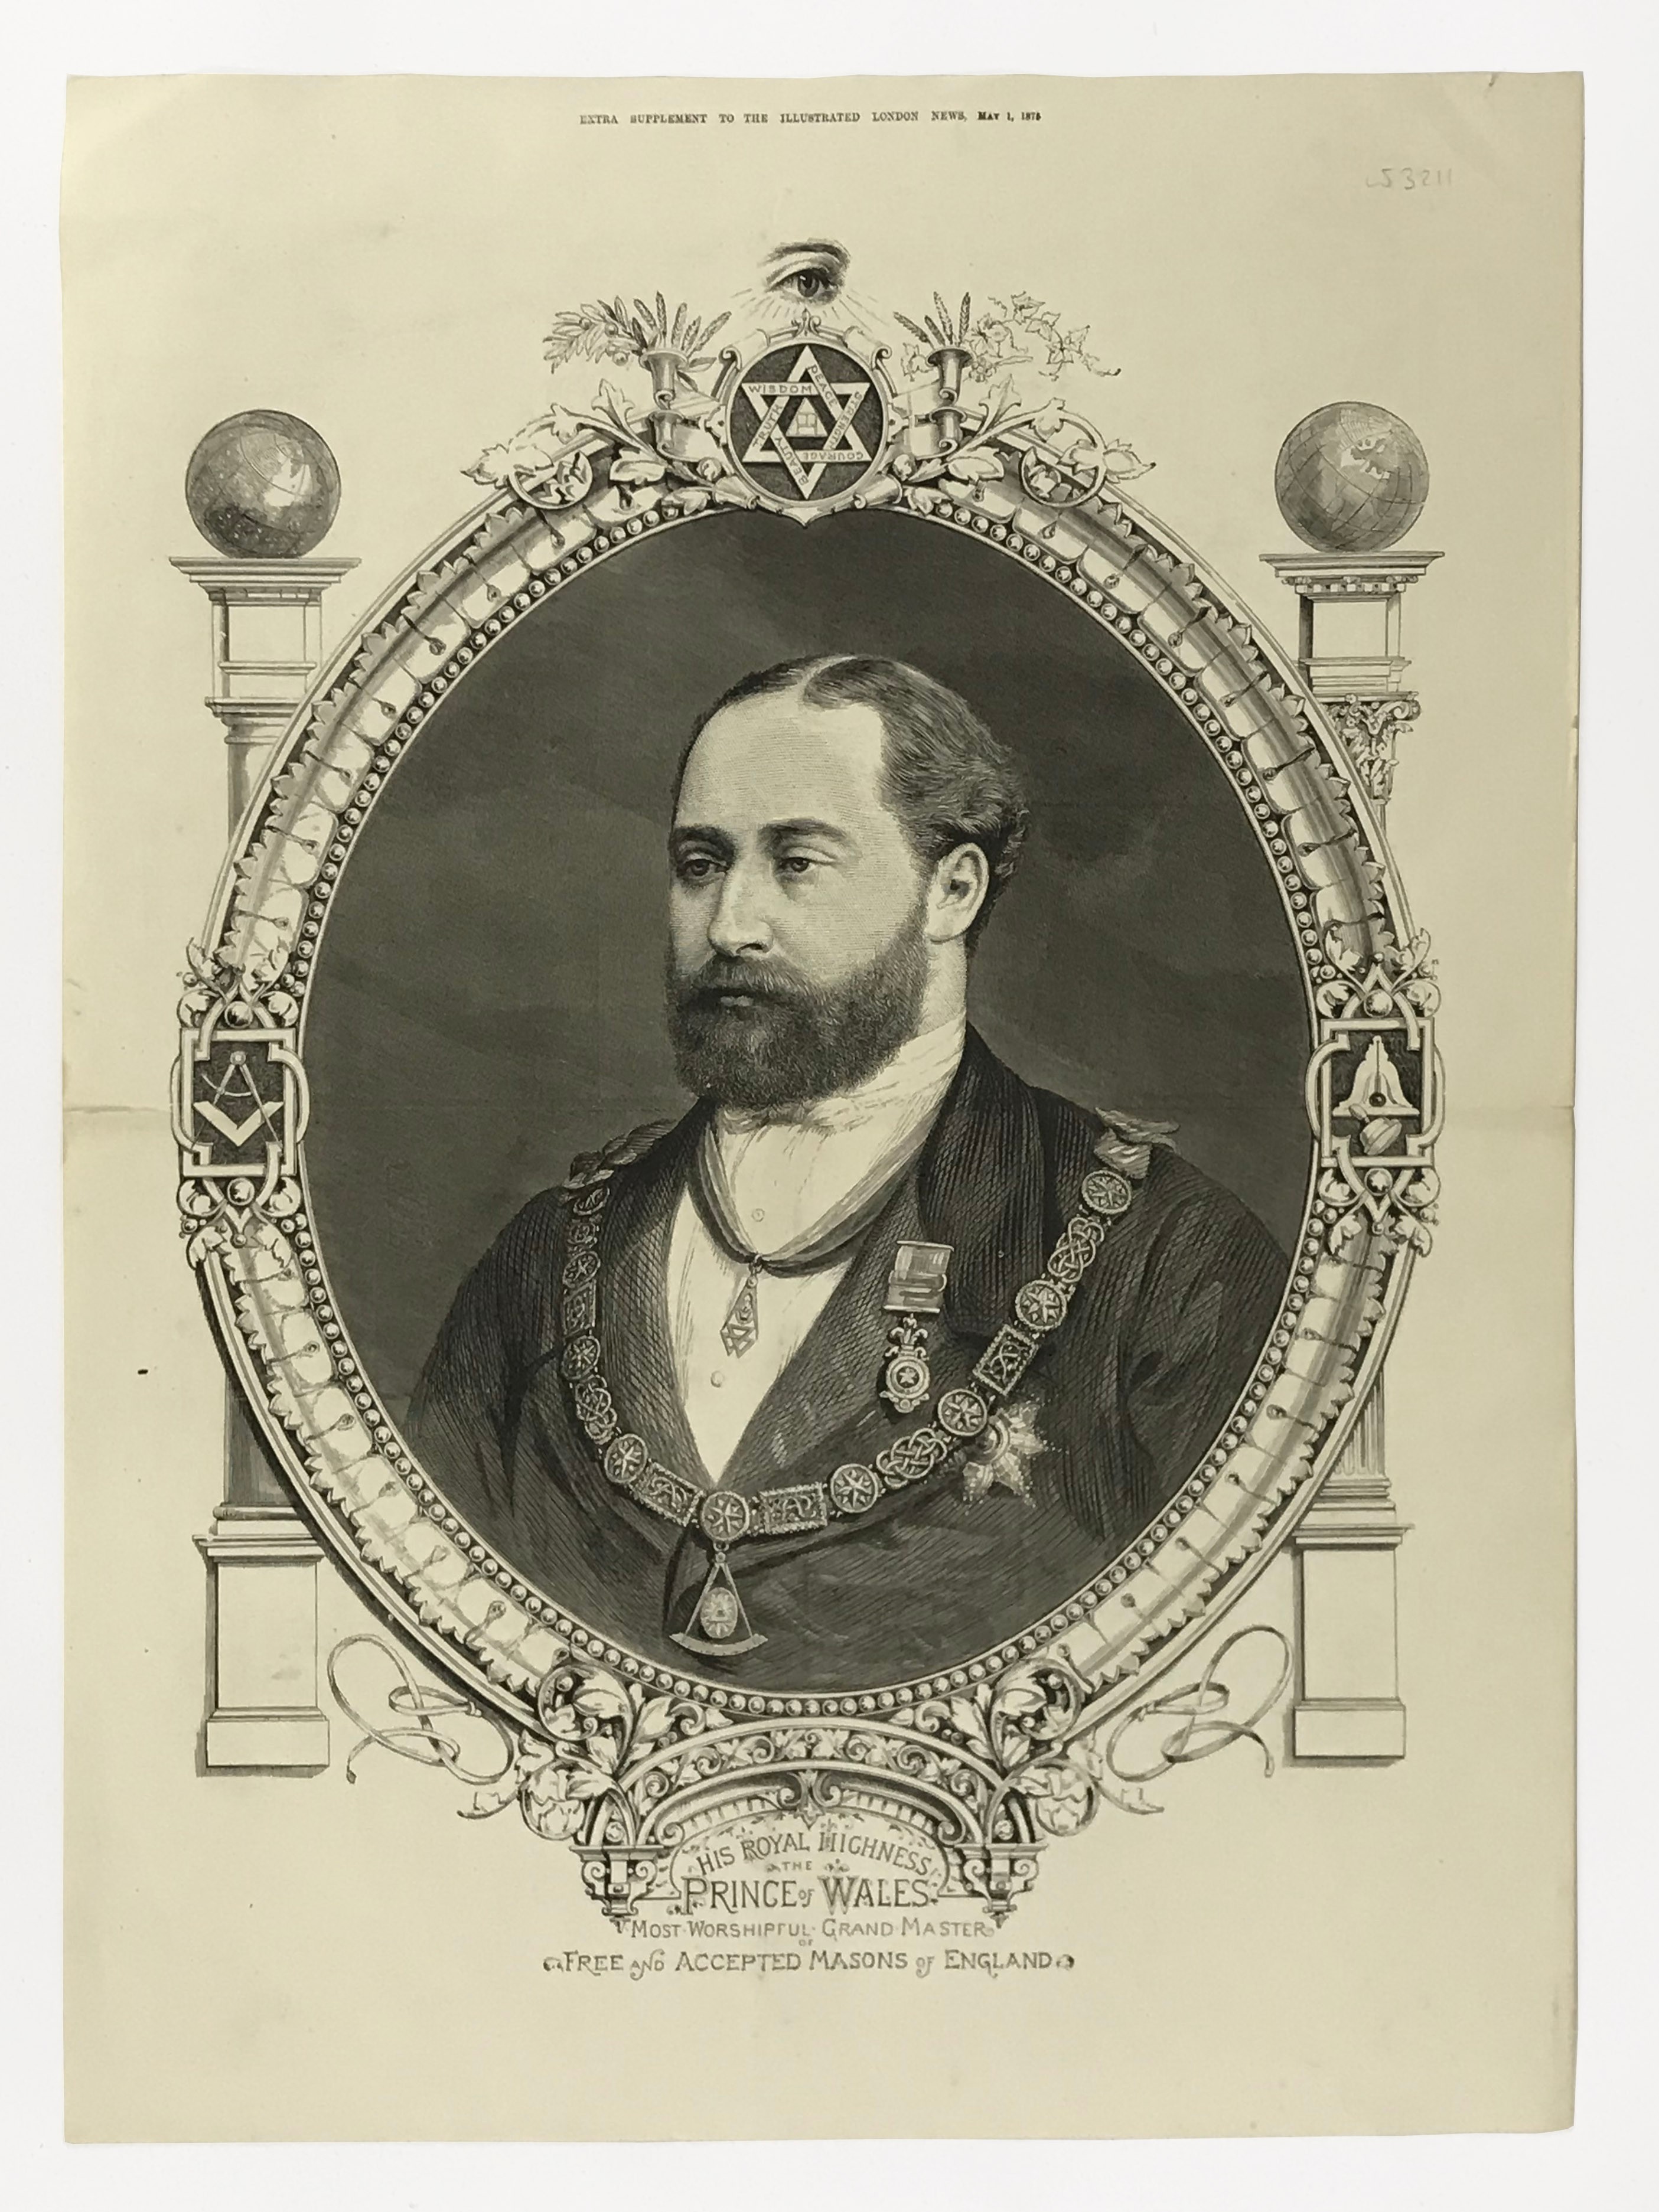 PRINT OF THE HRH PRINCE OF WALES MOST WORSHIPFUL GRAND MASTER OF FREE AND ACCEPTED MASONS OF ENGLAND